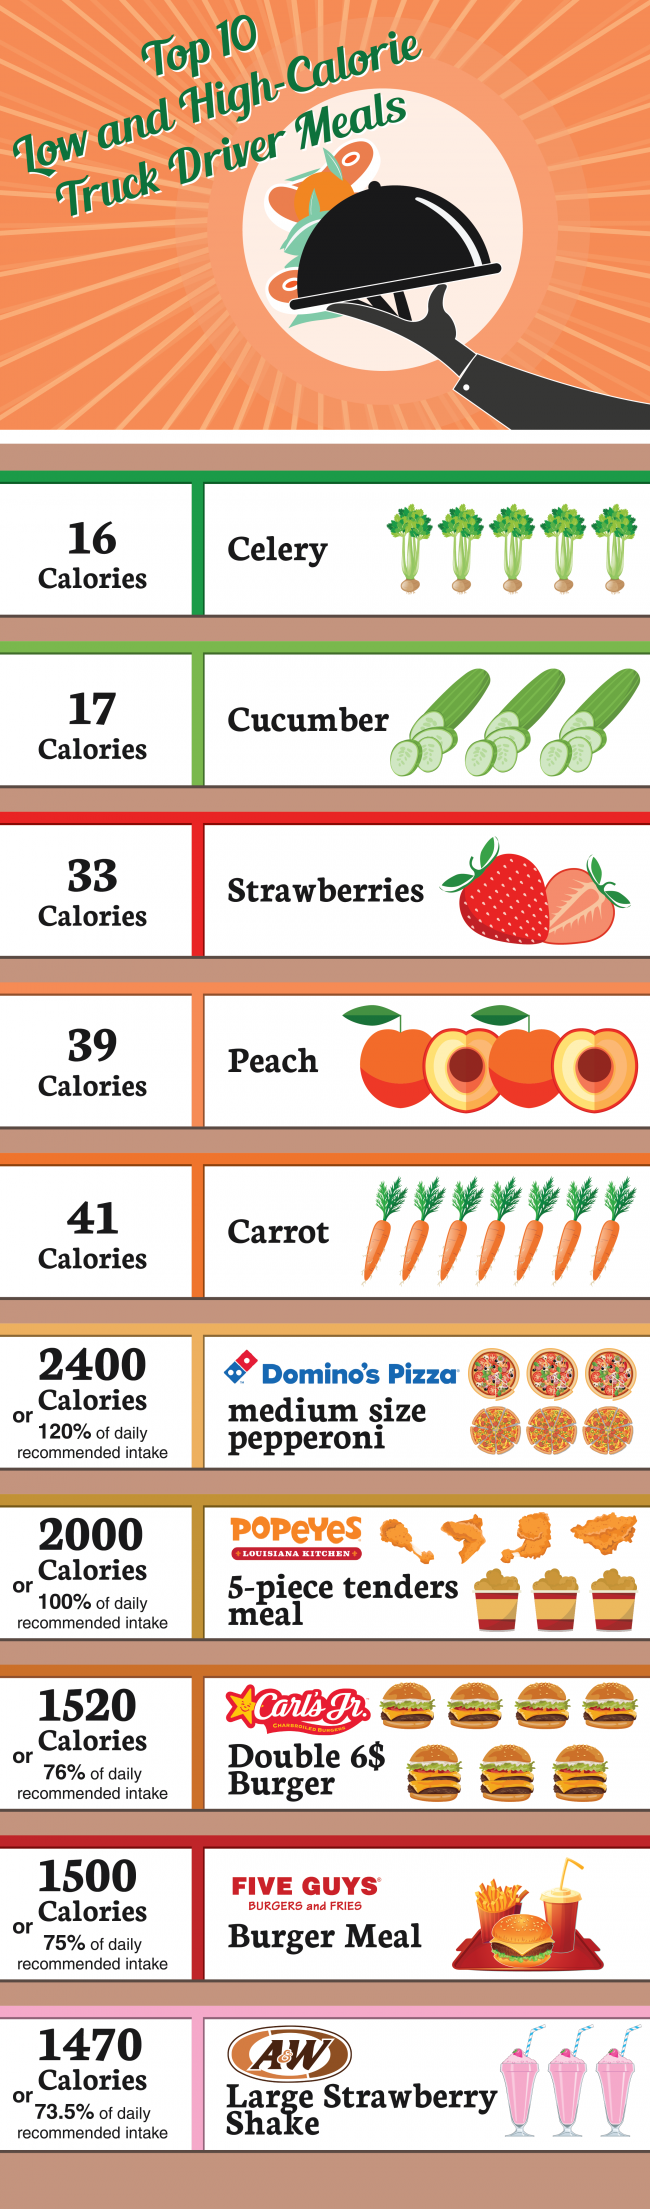 INFOGRAPHIC: Top 10 Low and High-Calorie Truck Driver Meals